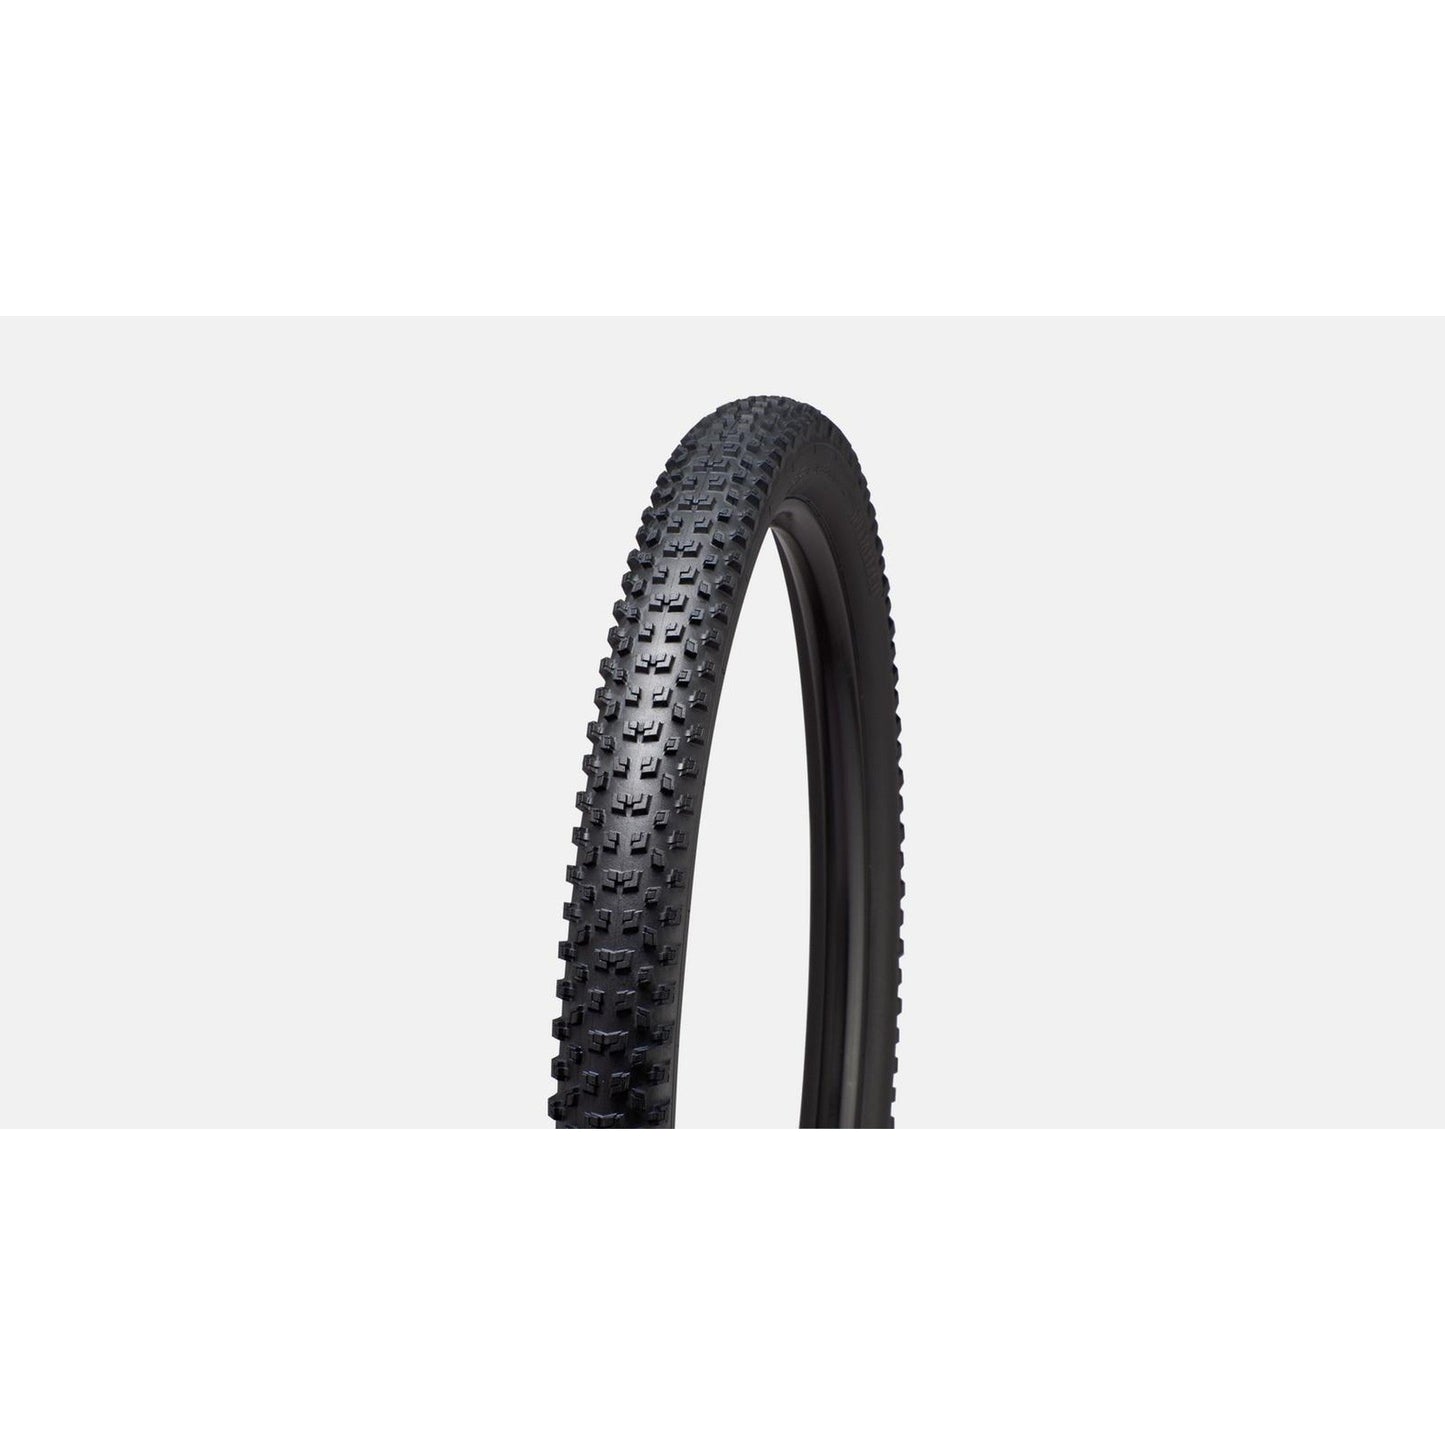 Ground Control Control 2Bliss Ready T5 | Complete Cyclist - The Ground Control Control 2Bliss Ready T5 uses an extremely versatile tread pattern which can be used from cross country race to trail, it rolls fast with exceptional amounts of confidence and grip. 